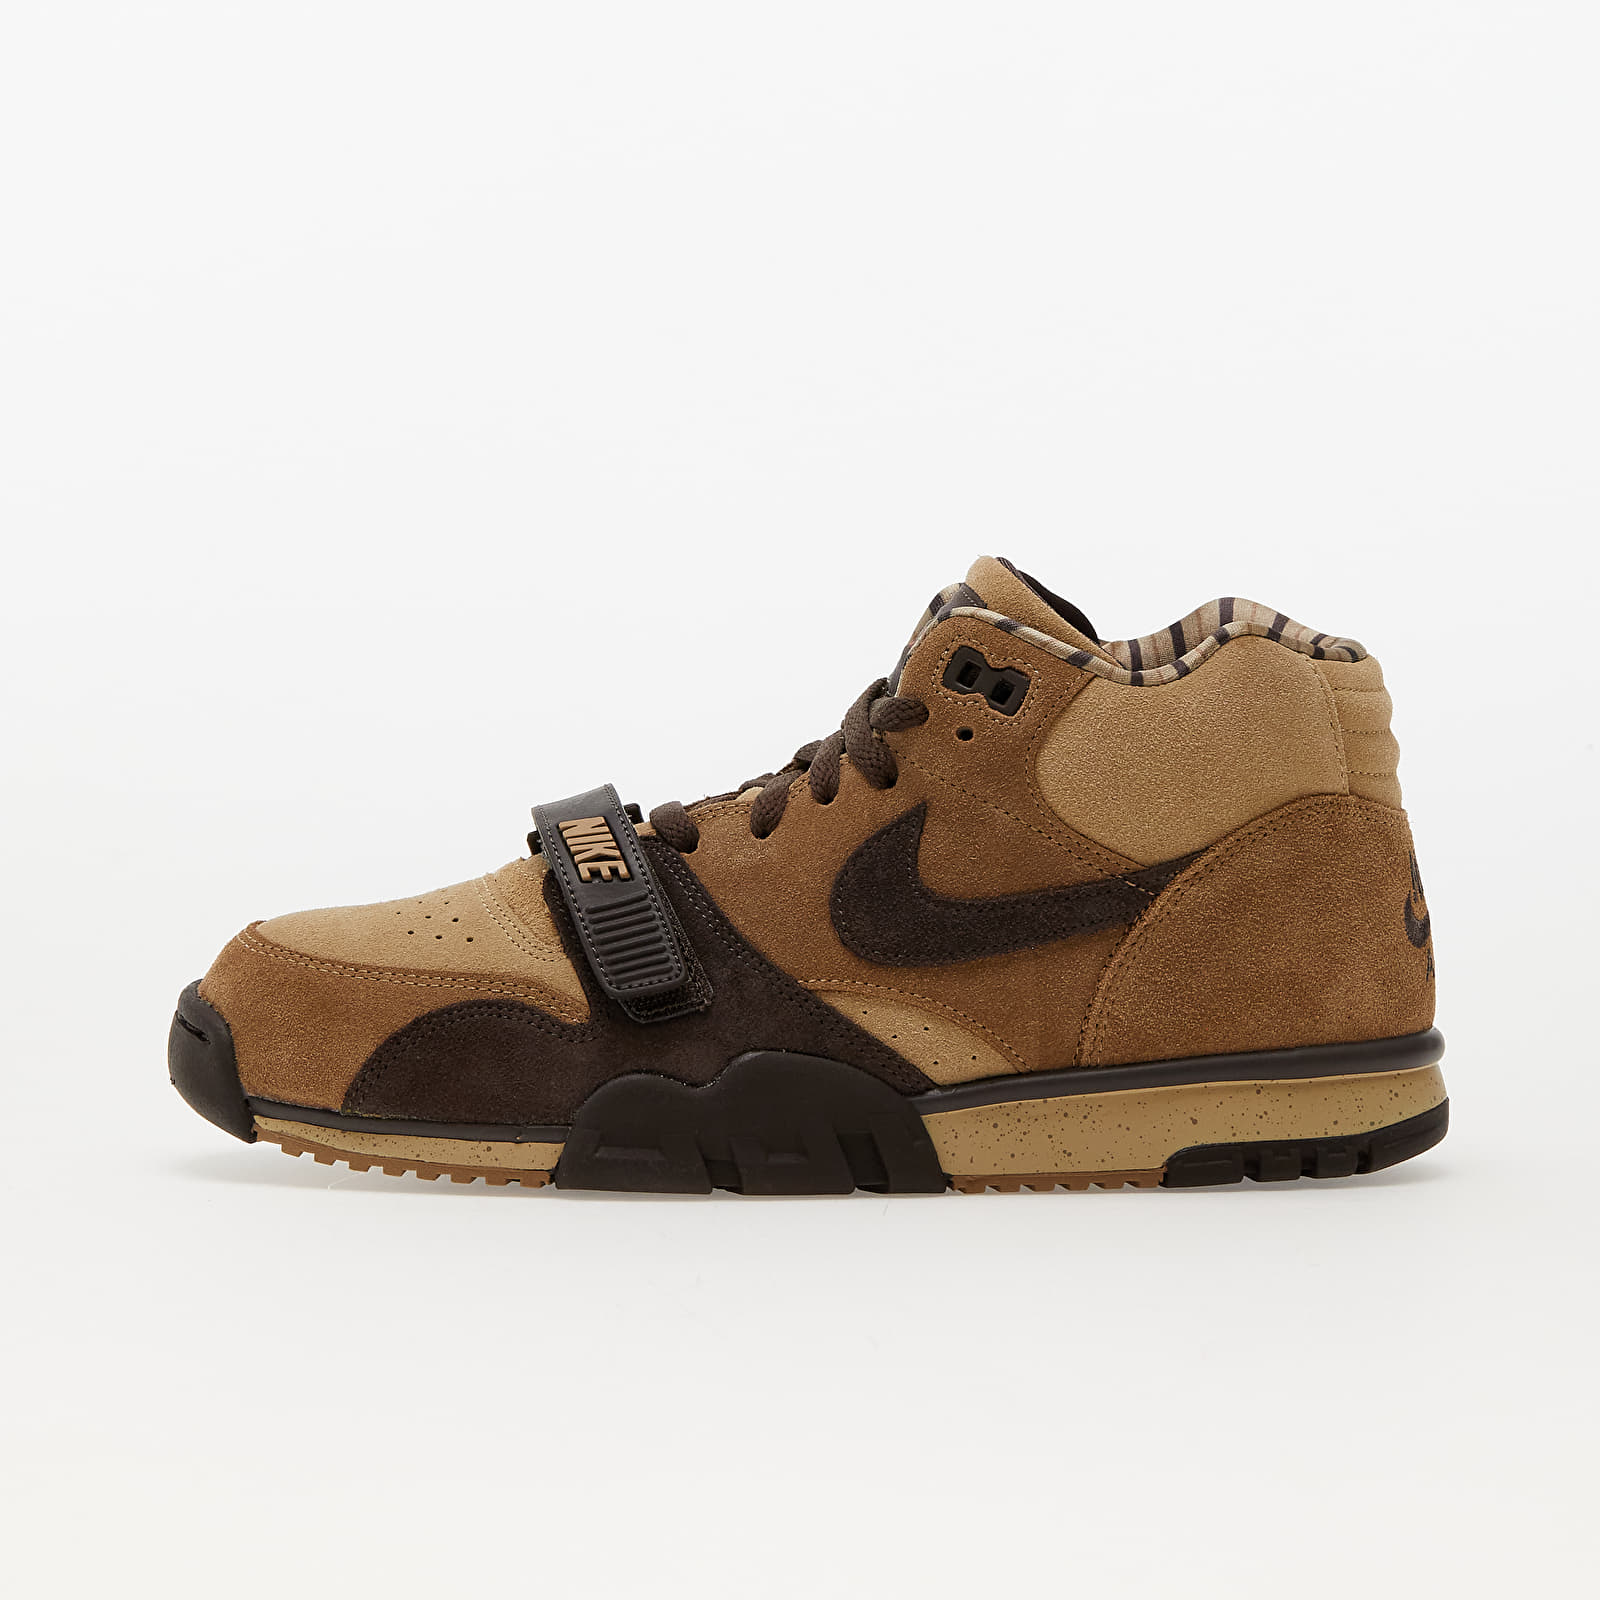 Chaussures et baskets homme Nike Air Trainer 1 Hay/ Baroque Brown-Taupe-Varsity Red